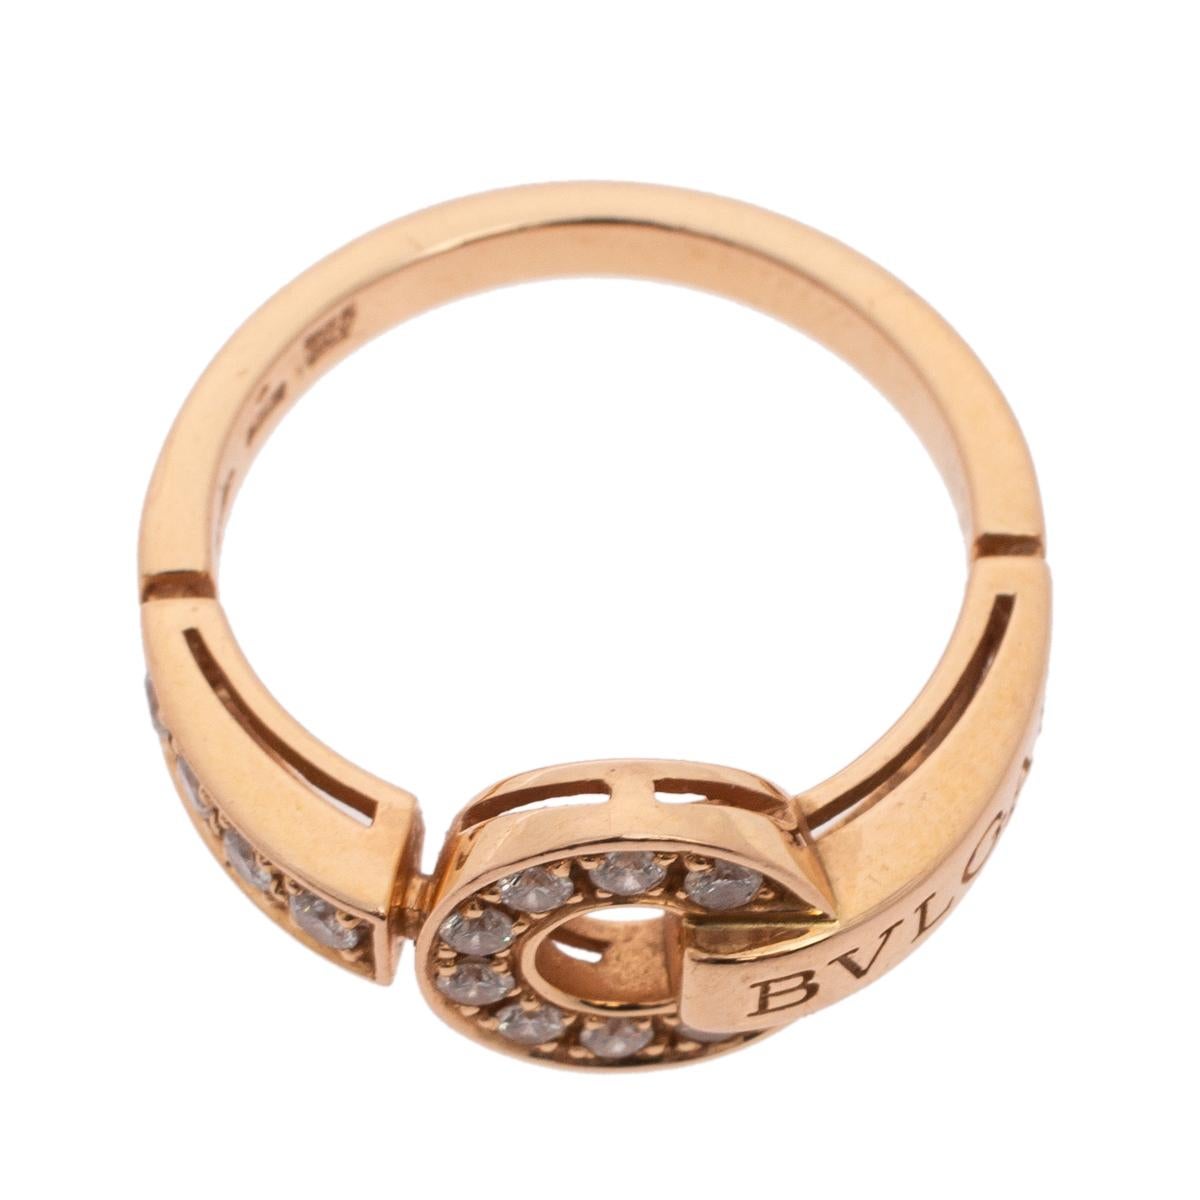 This elegant Bvlgari ring is the perfect accessory to complete your look. Crafted in 18k rose gold, this beautiful ring is set with pave diamonds and is engraved with the brand name. It is the perfect mix of timeless class and modern-day style. Add